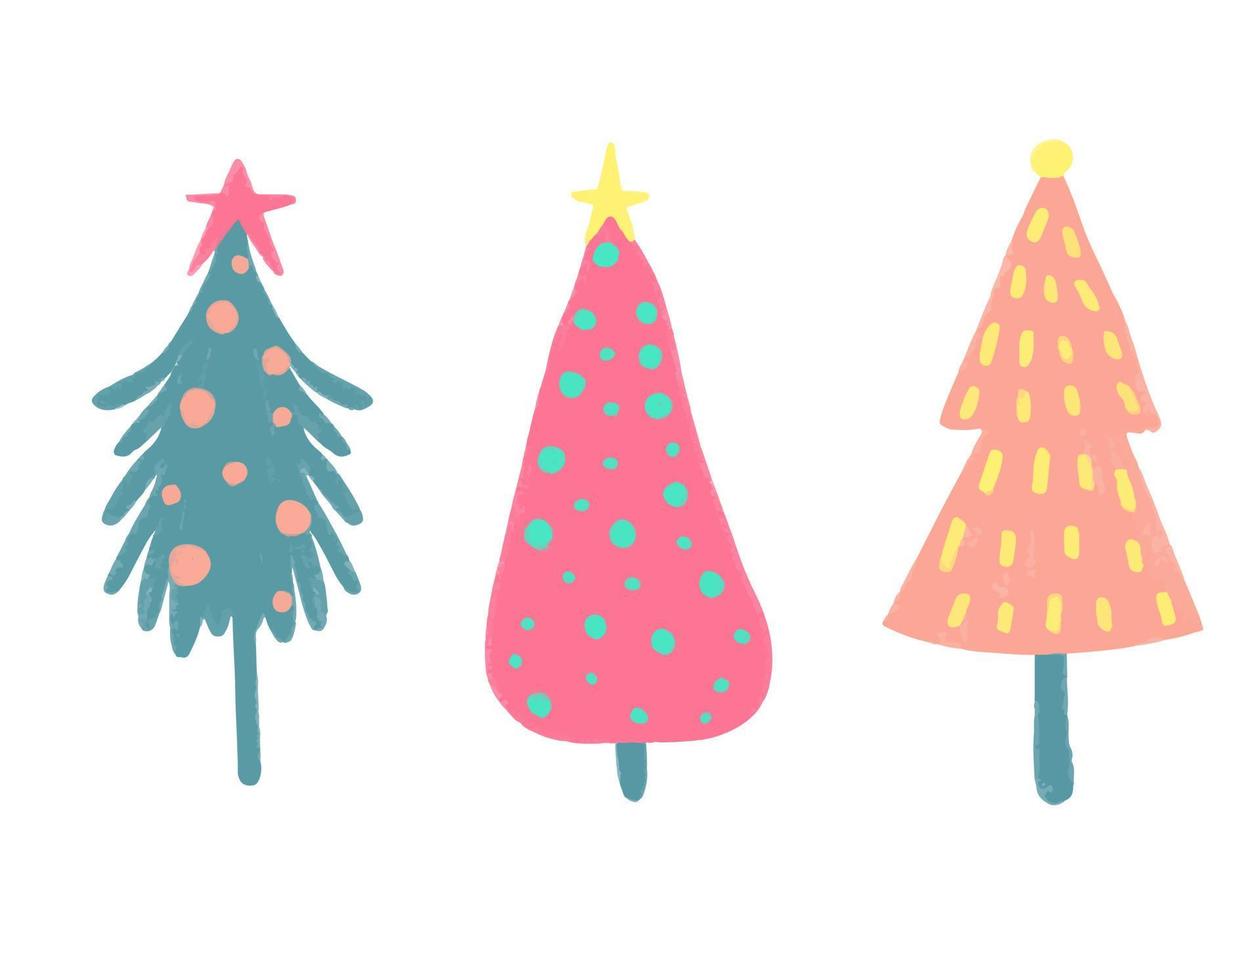 Watercolor vector illustration of Christmas trees. Merry Christmas and Happy New Year greeting card.